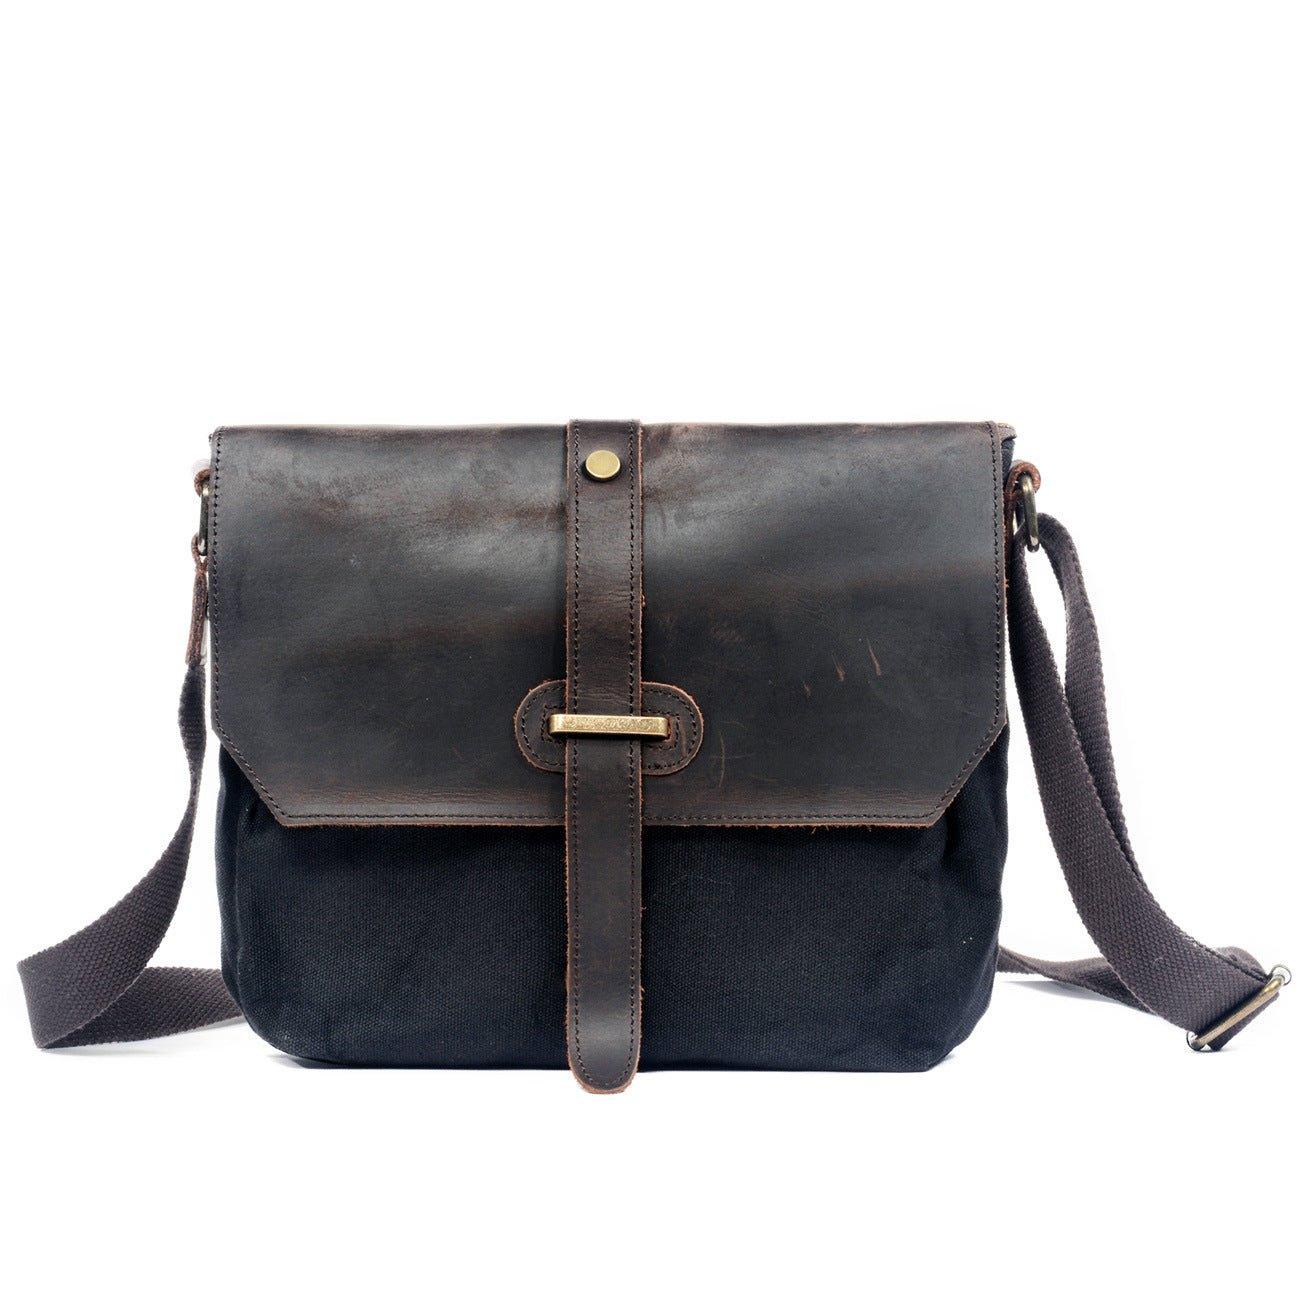 Waxed Canvas Sling Bag with Leather for Men - Woosir